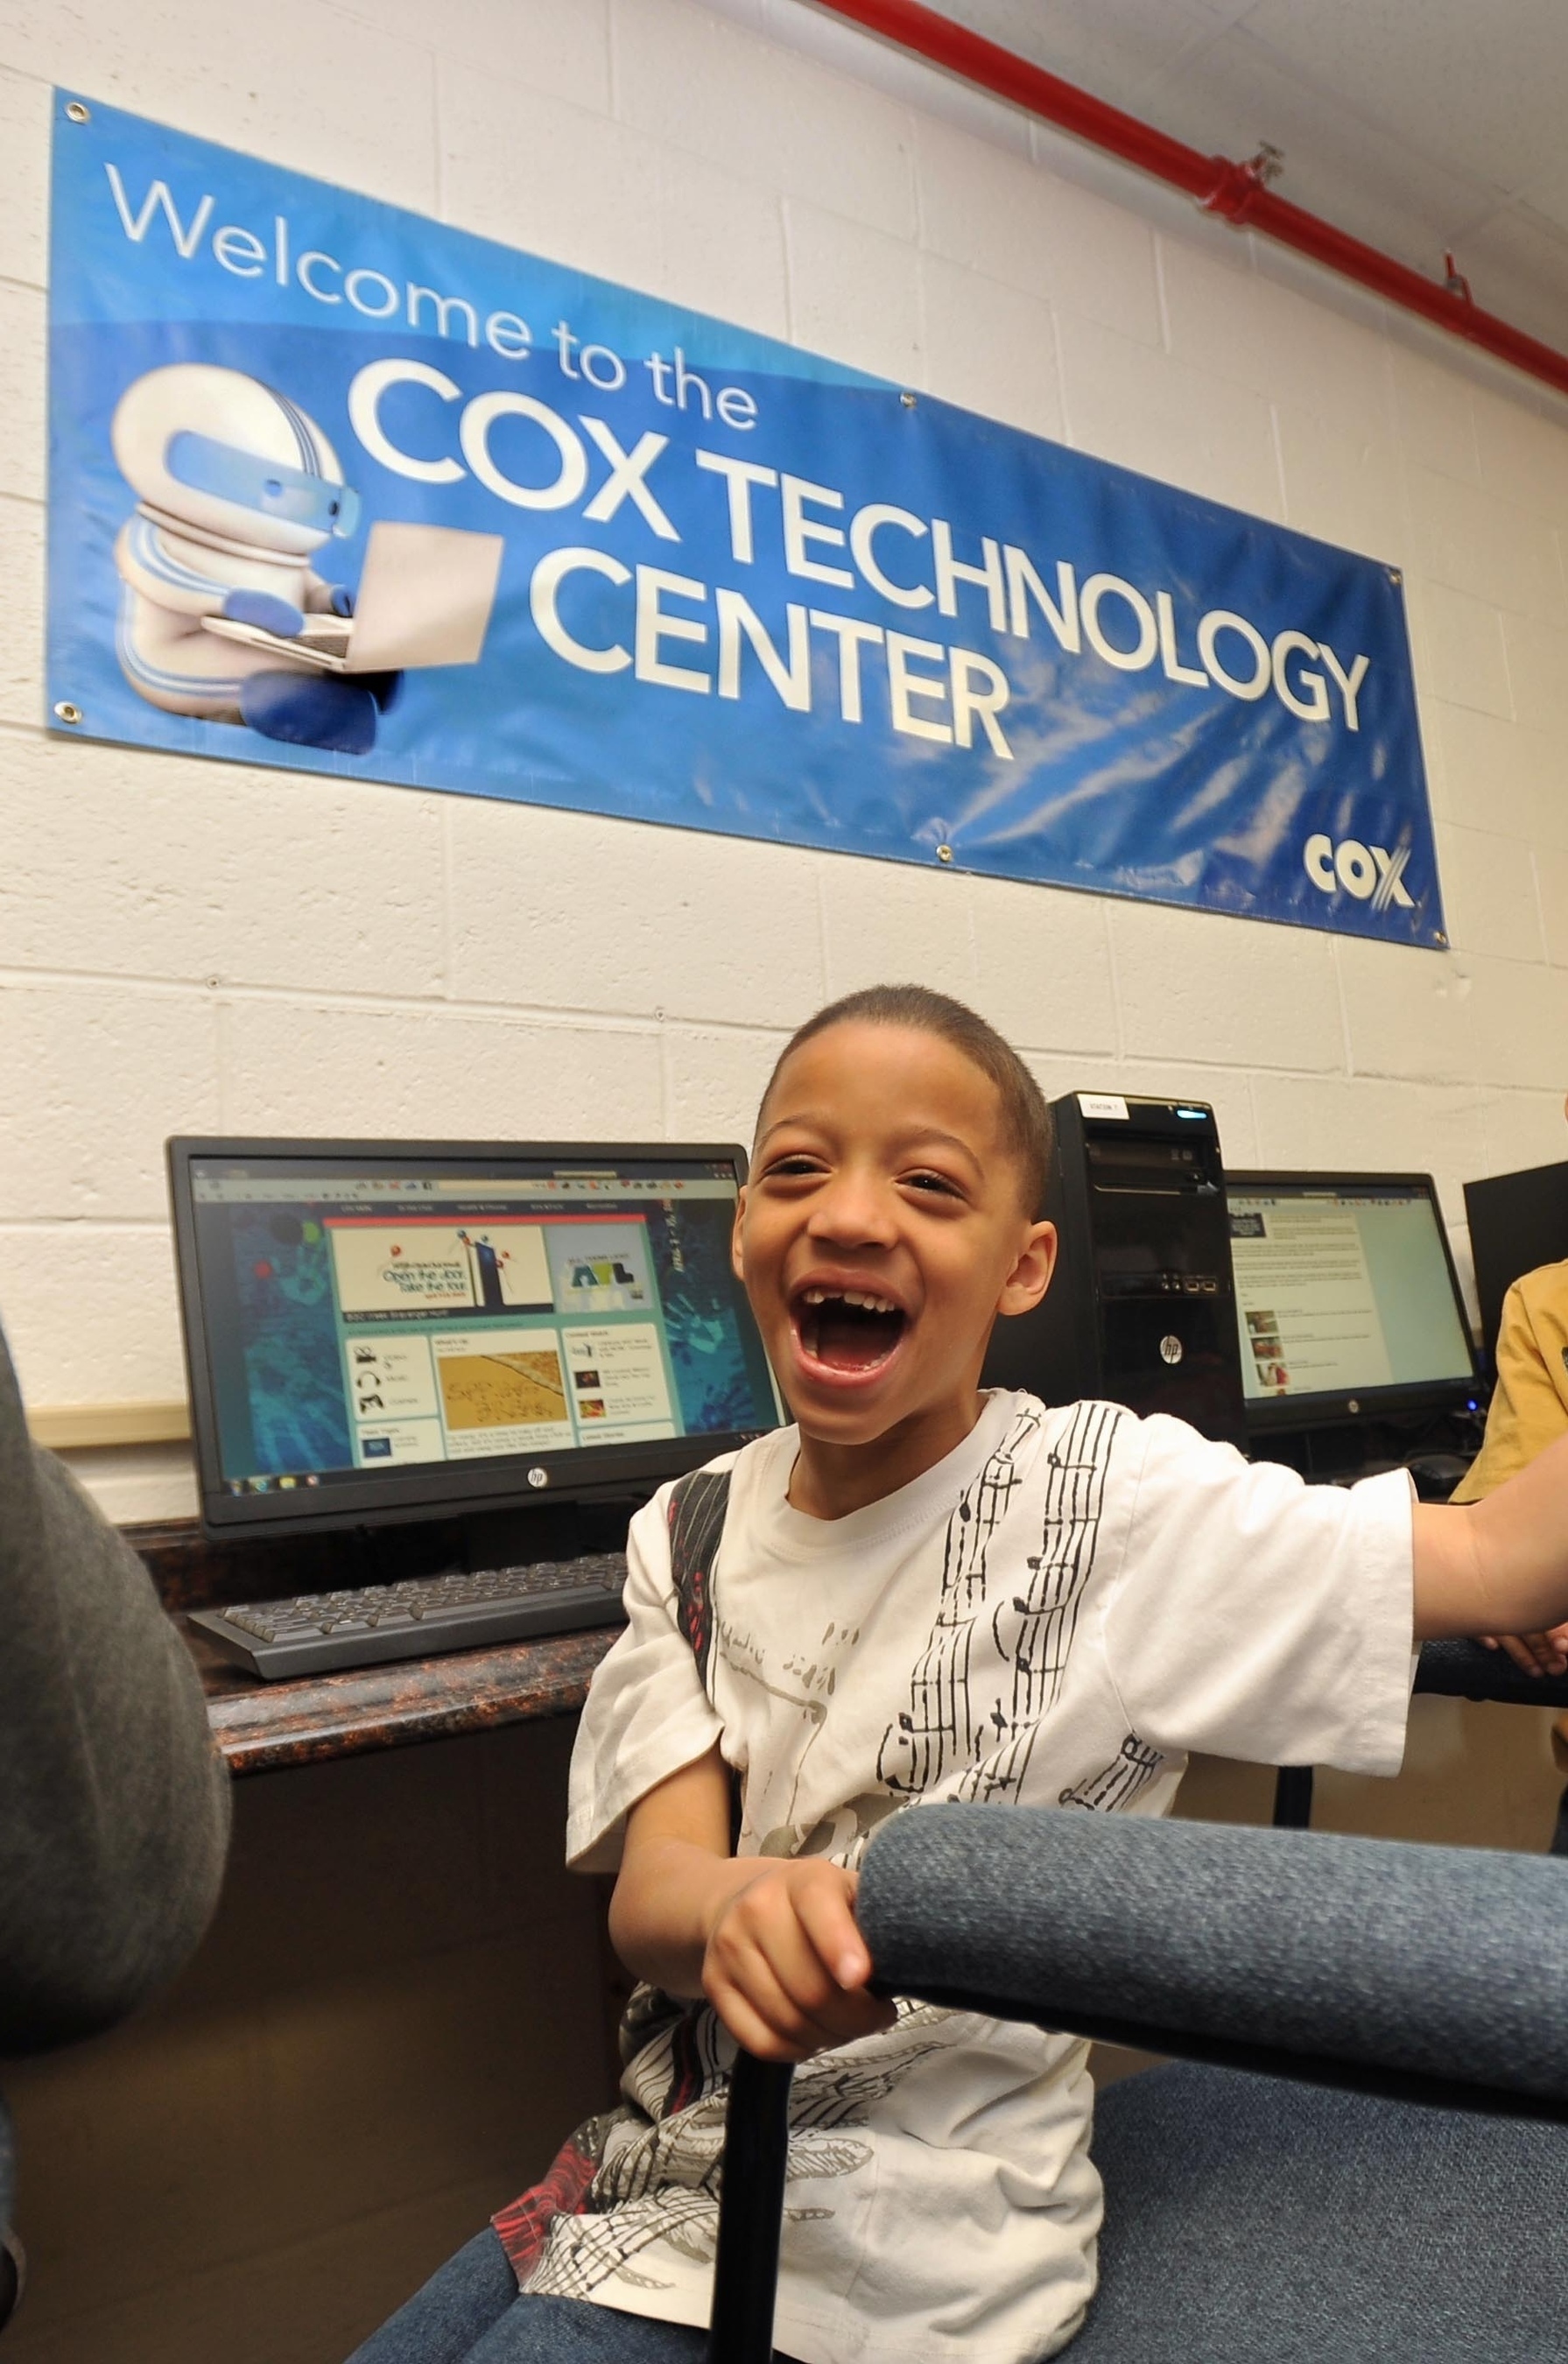 Boys & Girls Club members can use the Cox Technology Centers to assist with homework, research, job searches and college preparation. (PRNewsFoto/Cox Communications)